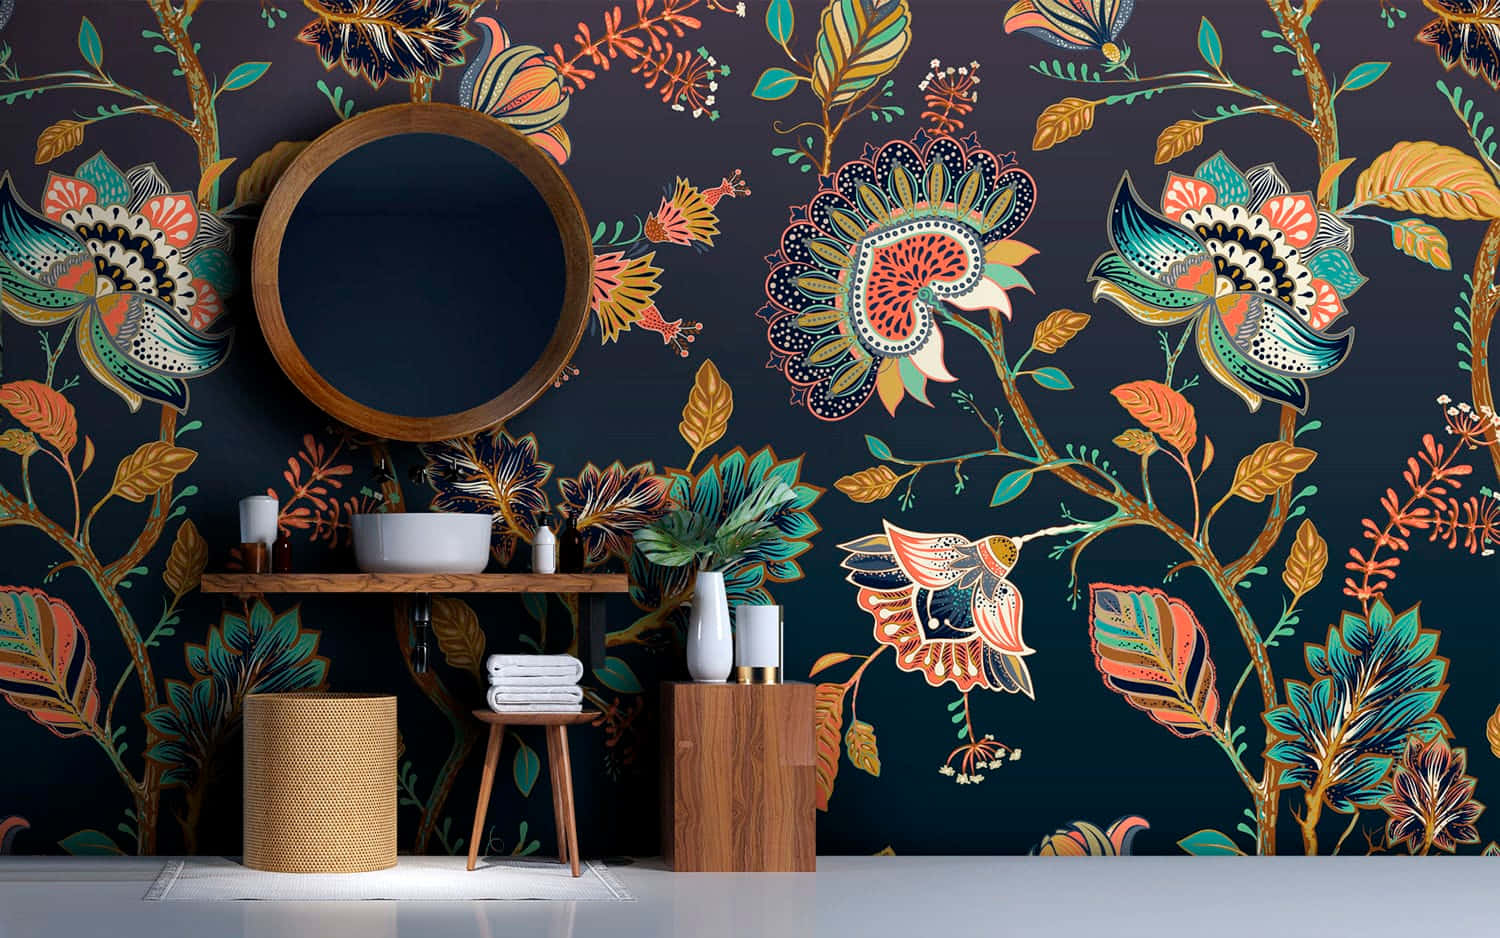 A Bathroom With A Colorful Floral Wallpaper